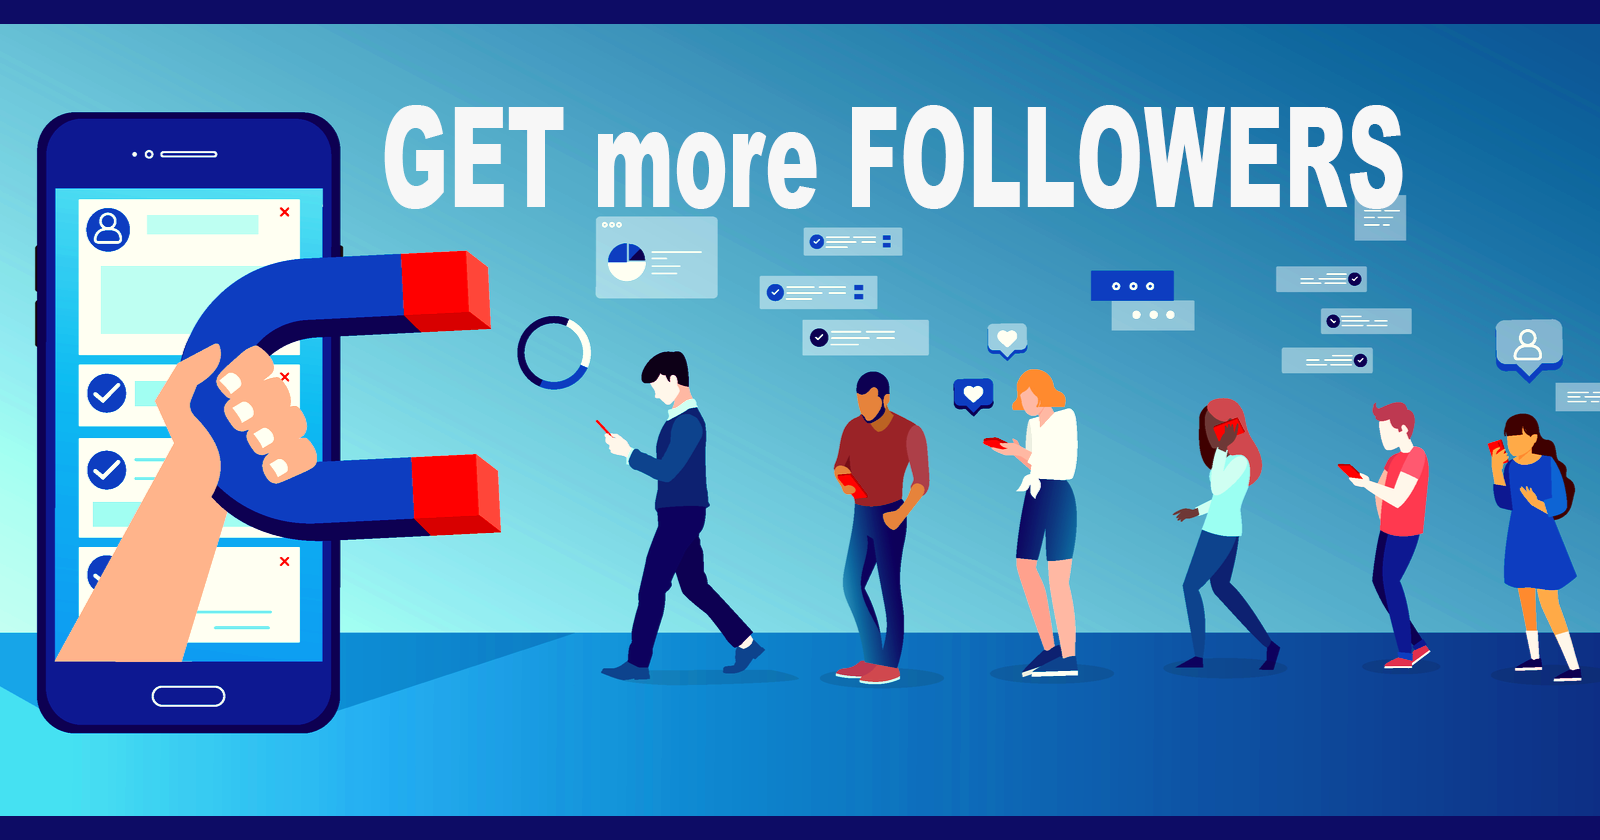 Learn how to get more followers on social media platforms.